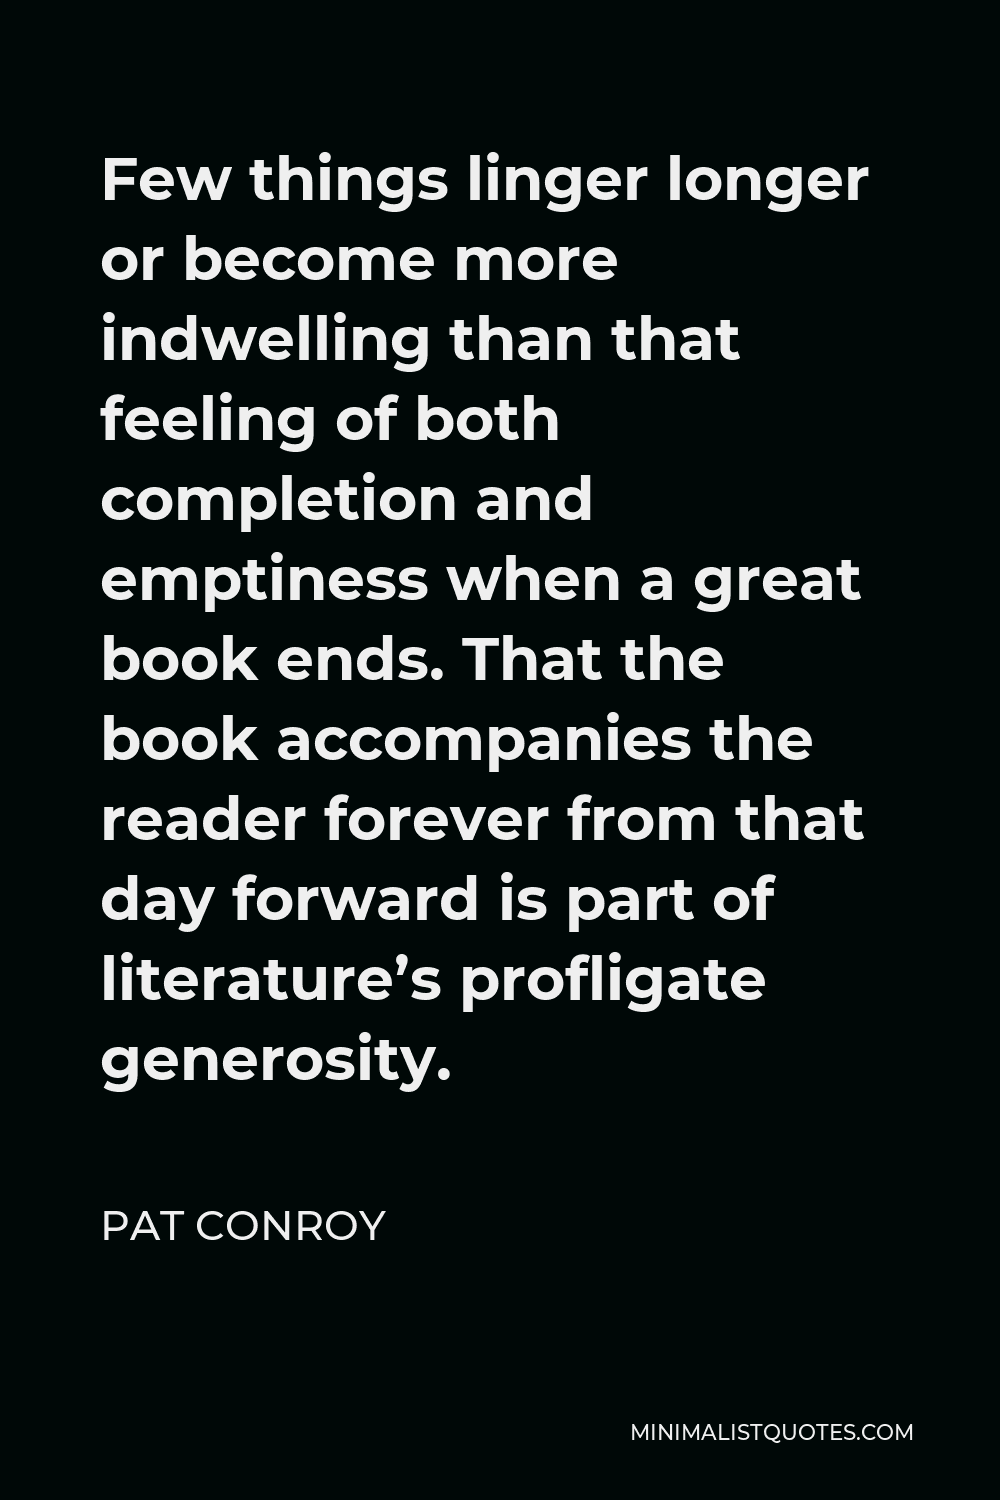 Pat Conroy Quote - Few things linger longer or become more indwelling than that feeling of both completion and emptiness when a great book ends. That the book accompanies the reader forever from that day forward is part of literature’s profligate generosity.